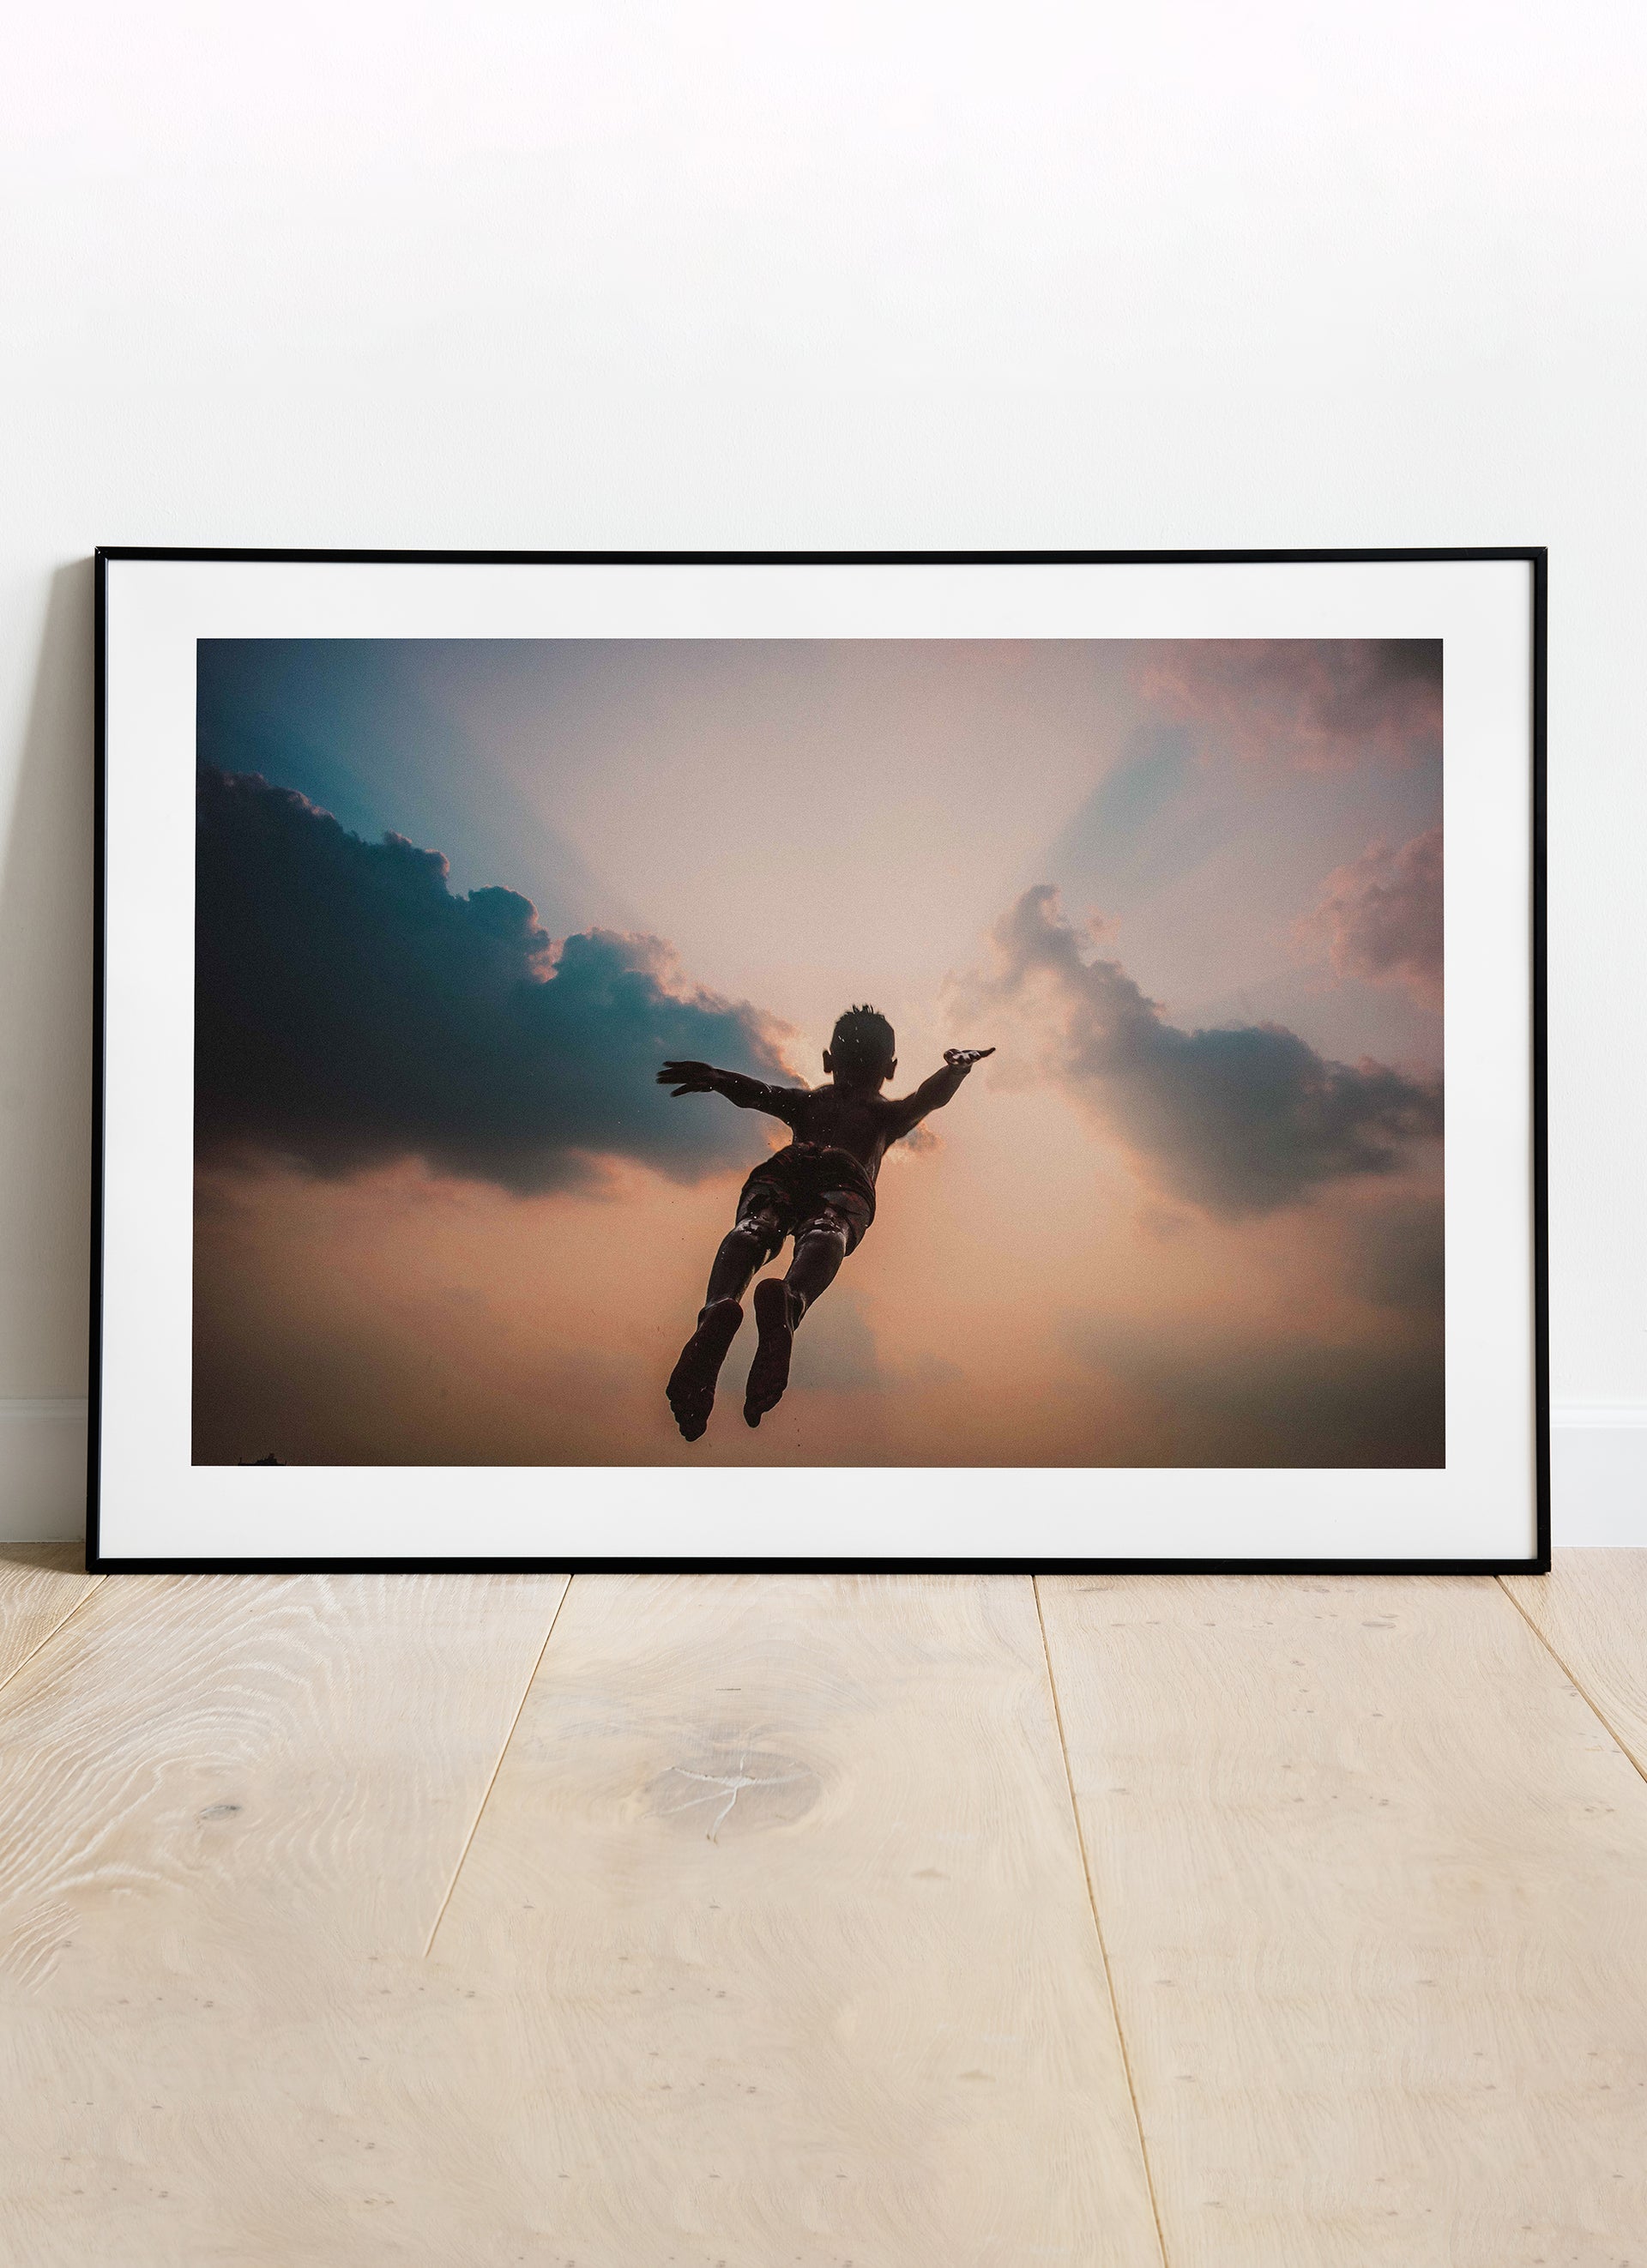 Photo print by Shivam in the frame, sunset jump